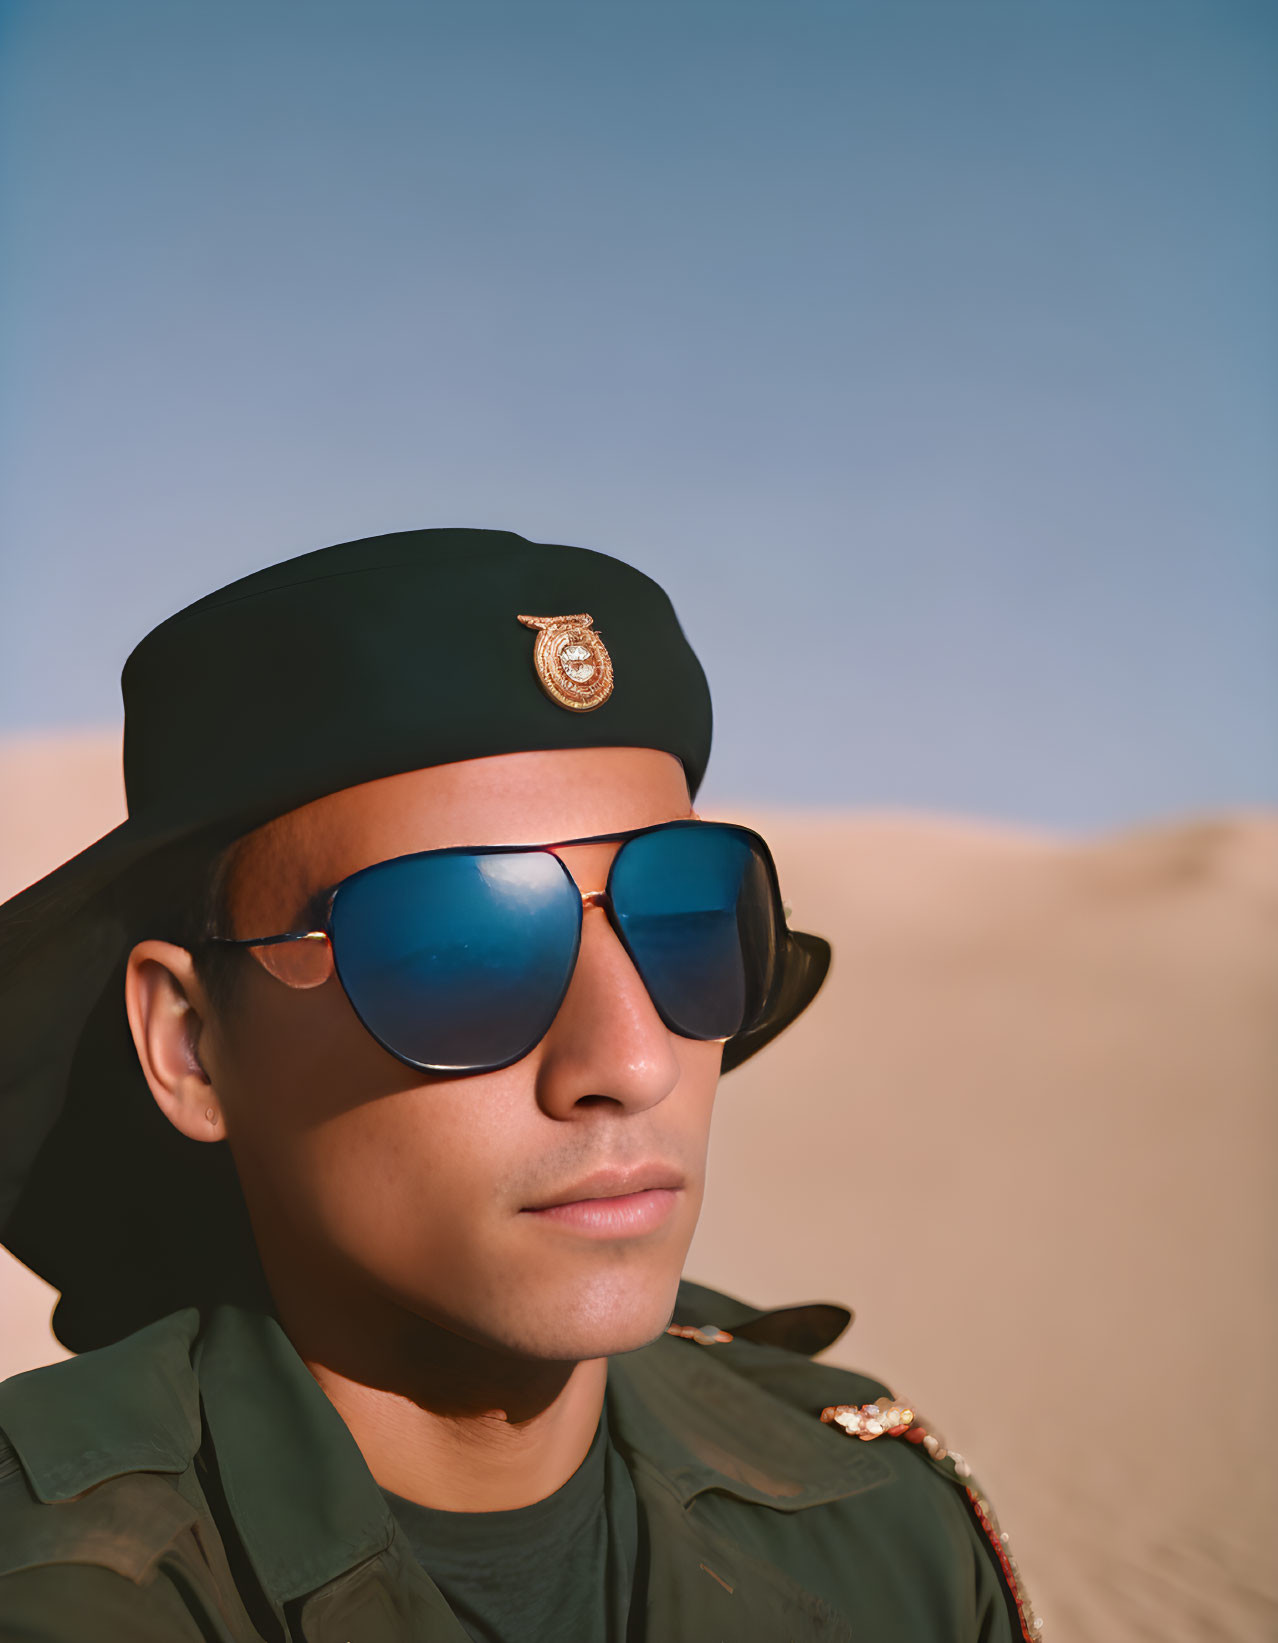 Person in Green Military Uniform with Beret and Aviator Sunglasses in Desert Setting